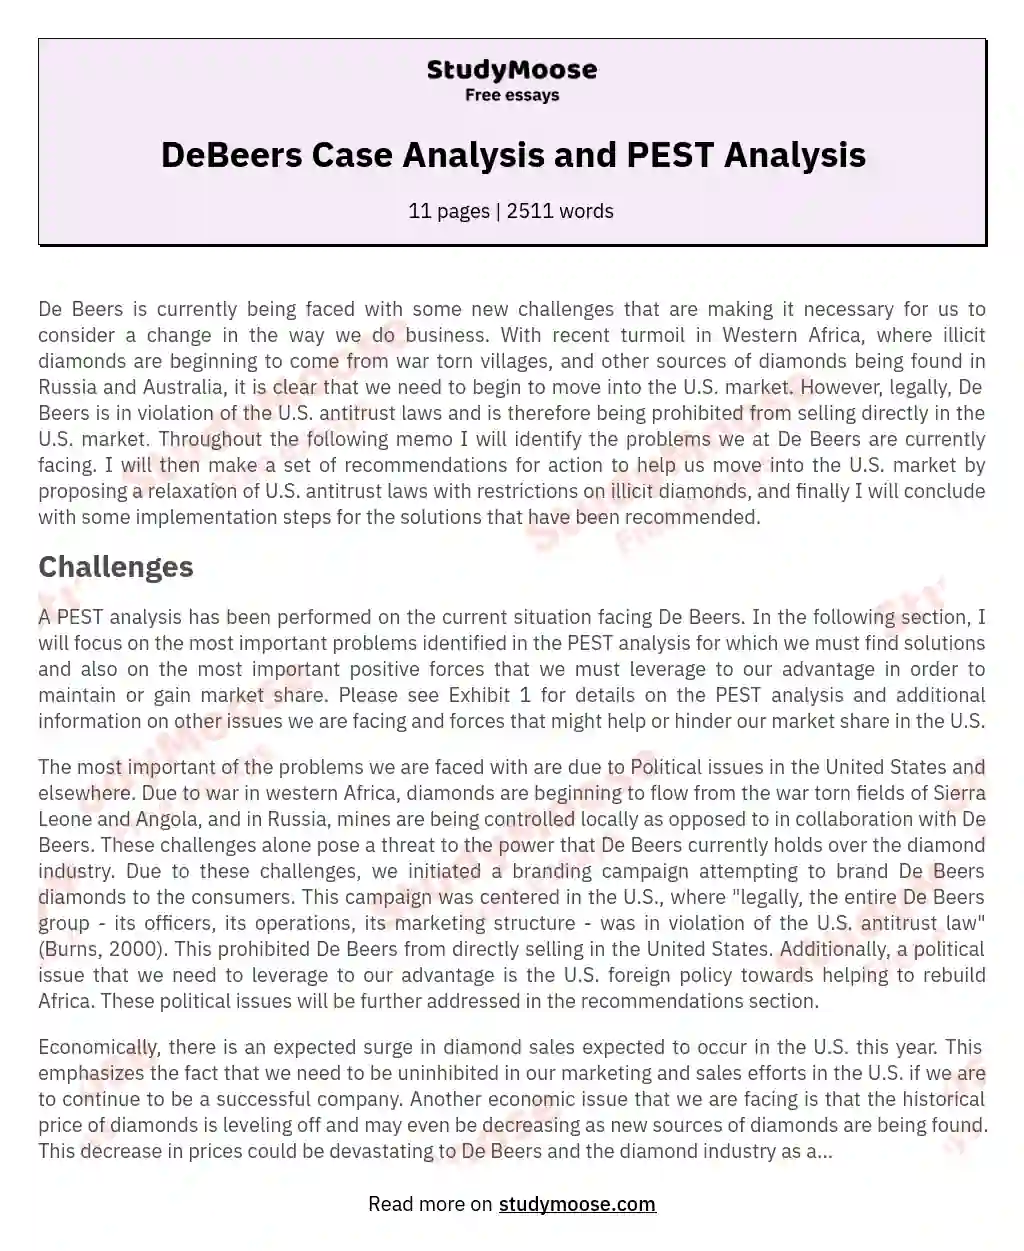 DeBeers Case Analysis and PEST Analysis essay